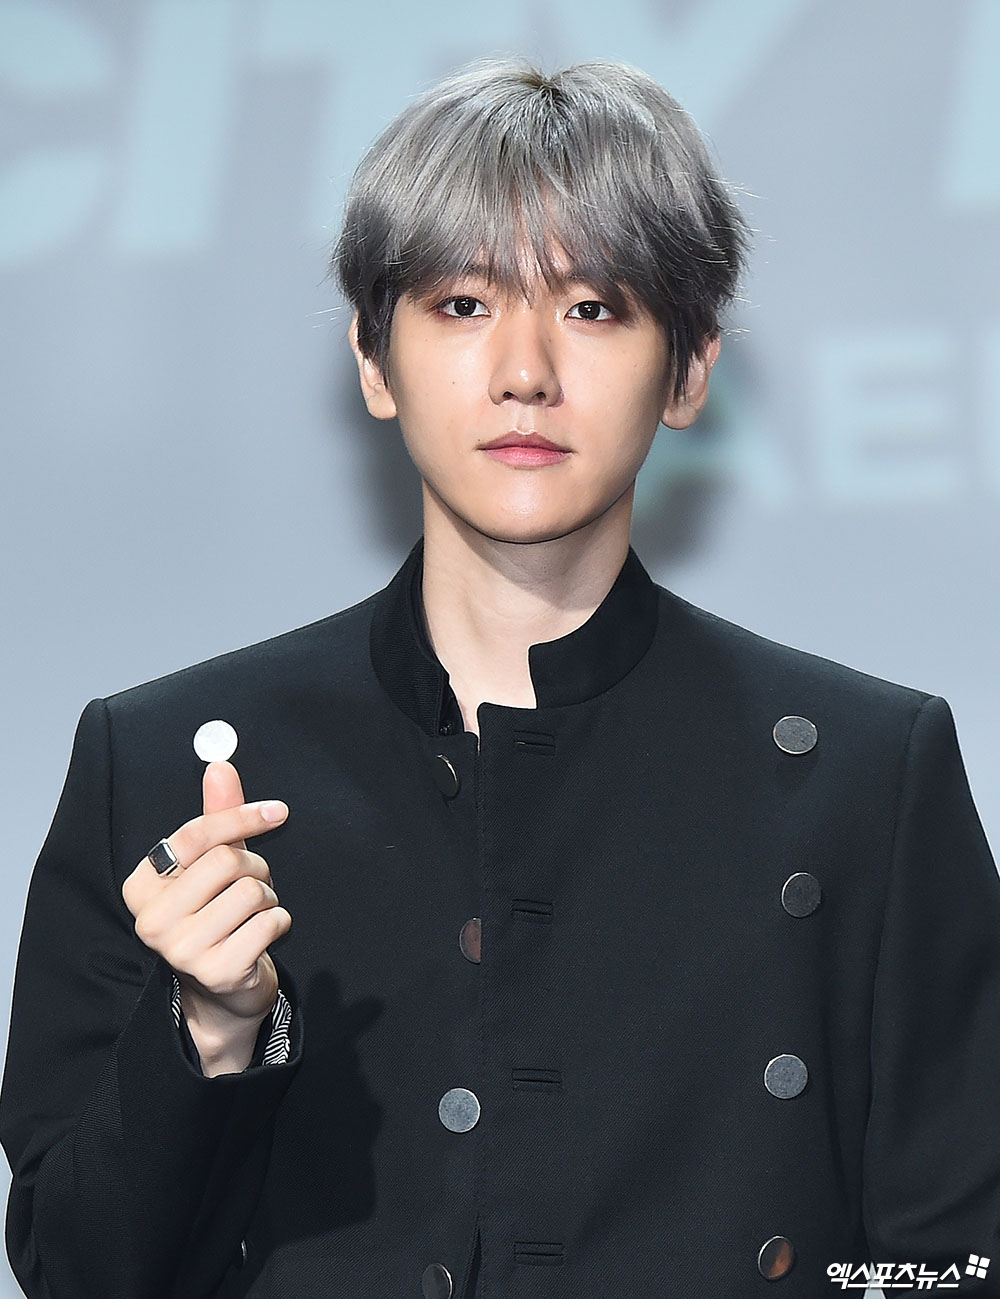 The group EXO Baekhyun released a solo album that has been a long time.On the 10th, Showcase was held at SAC Art Hall in Gangnam-gu, Seoul to commemorate the release of the group EXOs Baekhyuns solo album City Lights.EXOs main vocalist, Baekhyuns first solo City Lights, featured a total of six songs in a trendy atmosphere.The title is United Nations Village, a romantic-like R&B song; Baekhyun presented Love Live! with Standmic.I have shown you various activities in EXO and EXO Chenbak City, but when I was working as a solo, I was not burdened at first, said Baekhyun I have no members to expect and I have to show myself completely.I am looking forward to what it will be like today, and I think I want to show it quickly. My superpower is light, said Baekhyun, with the identity of Baekhyun, City Lights.When I listen to the EXO title and the songs, I have a choice in 10 seconds. I did not say this because it was my song. I was captivated in 10 seconds.I did not do well with correction recording, but I also made correction recordings about 2,3 times. I wanted to include my own emotions.The solo album was prepared from late last year; he said: I was slowed down because I didnt pick the title song well.It took a total of eight months to come out. Today, there is no performance because the stage is narrow, but there is a plan to show a little performance in music broadcasting.I would be grateful if you could look at the room and say that it is another look of Baekhyun I was going to show my first solo album in seven years, and I was going to show you the color of Baekhyun, which is different from the image I showed in EXO, EXO Chenbak City, said BaekhyunThe more songs are very good, it was harder to decide the title song than to do the songs.I thought that it would be a new look to be a song with direct lyrics that I had not seen. If you look really well, there is a place I really like on the hill behind United Nations Village and I want to take you there and say I love you while watching a good scenery, he said of the title United Nations Village. It seems to have been fresh and good.Many people seem to have caused the curiosity, United Nations Village? What is it? Is it where I think it is? Baekhyun said that United Nations Village did not want to be a title in the company, but I want to do this song.Thats what the company told me: One part of the United Nations Village refrain part has changed, he said, singing on the spot.It was the first solo to be released in seven years, so I felt a lot of pressure. After the concert preparations, I took a lot of care, including receiving separate training.I have also been helped to improve my personal skills. Solo seems to have helped me improve my skills. It has been a good synergy.I also wanted to do a lot of Top Model dismissals. The genre I wanted to try with solo was hip-hop R & B.I think I prepared a lot of esentery because I thought it was hip-hop R & B that could freely perform and gesture when I was going to fit well. Binzino, who had no regular friendship with the song feature, was involved in Baekhyuns love call, although he had no friendship.The difference between EXO and Baekhyun he says is the difference between what you see and what you hear.It is like the difference between showing the intensity of performance and instilling intensity in the voice filled by the individual, said Baekhyun EXO appeals sexy with performance, and Baekhyuns solo appeals sexy with voice.Although it was his first solo album, he did not do Top Model in writing or composing separately; Baekhyun confessed that he had done Top Model in the past, but he had rejected it straight away from the company.I tried to do more of what I was good at and to develop what I was good at, and I focused on vocals and dances that I could do well, Baekhyun said.If I have the opportunity, I can participate, but I thought it would be a priority to show such stability as a player by improving my individual skills rather than participating in writing.The number of 400,000 copies was so amazing that I could not imagine it, he said. I do not believe it until now.I still do not believe it because I know it by opening the number of 400,000. I think I can trust it with my own eyes. EXOel You have waited a lot.When I met with group fan signings and fans, I asked a lot of questions about when I come out with solo. I was delighted to be able to repay the fans expectations.I have never thought about my grades. If I get to the top, I think I should think about it then. I think it would be really good if I did it.Meanwhile, Baekhyun will open a fan showcase at 8 pm after releasing the album at 6 pm and release the stage to fans.This showcase is broadcast live worldwide through VLove Live!